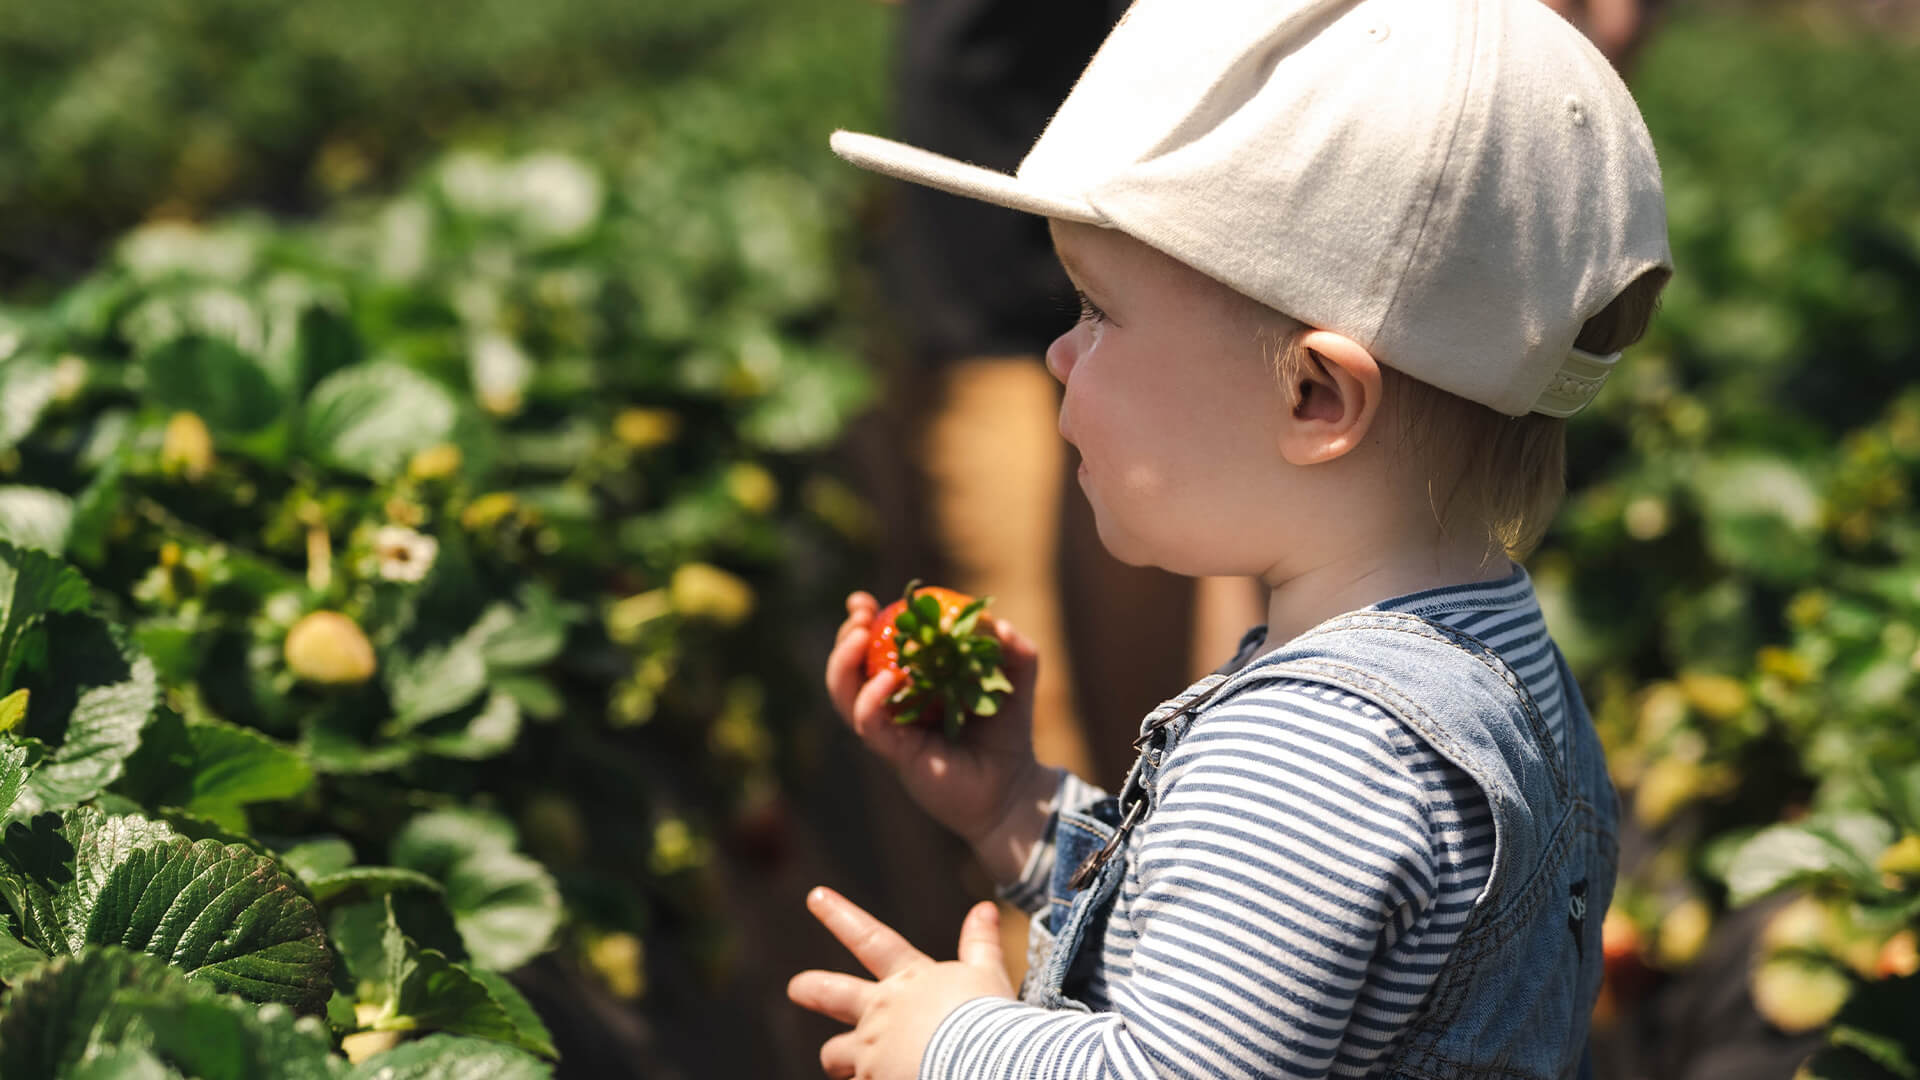 Toddler outside next to plants with a strawberry in their hand